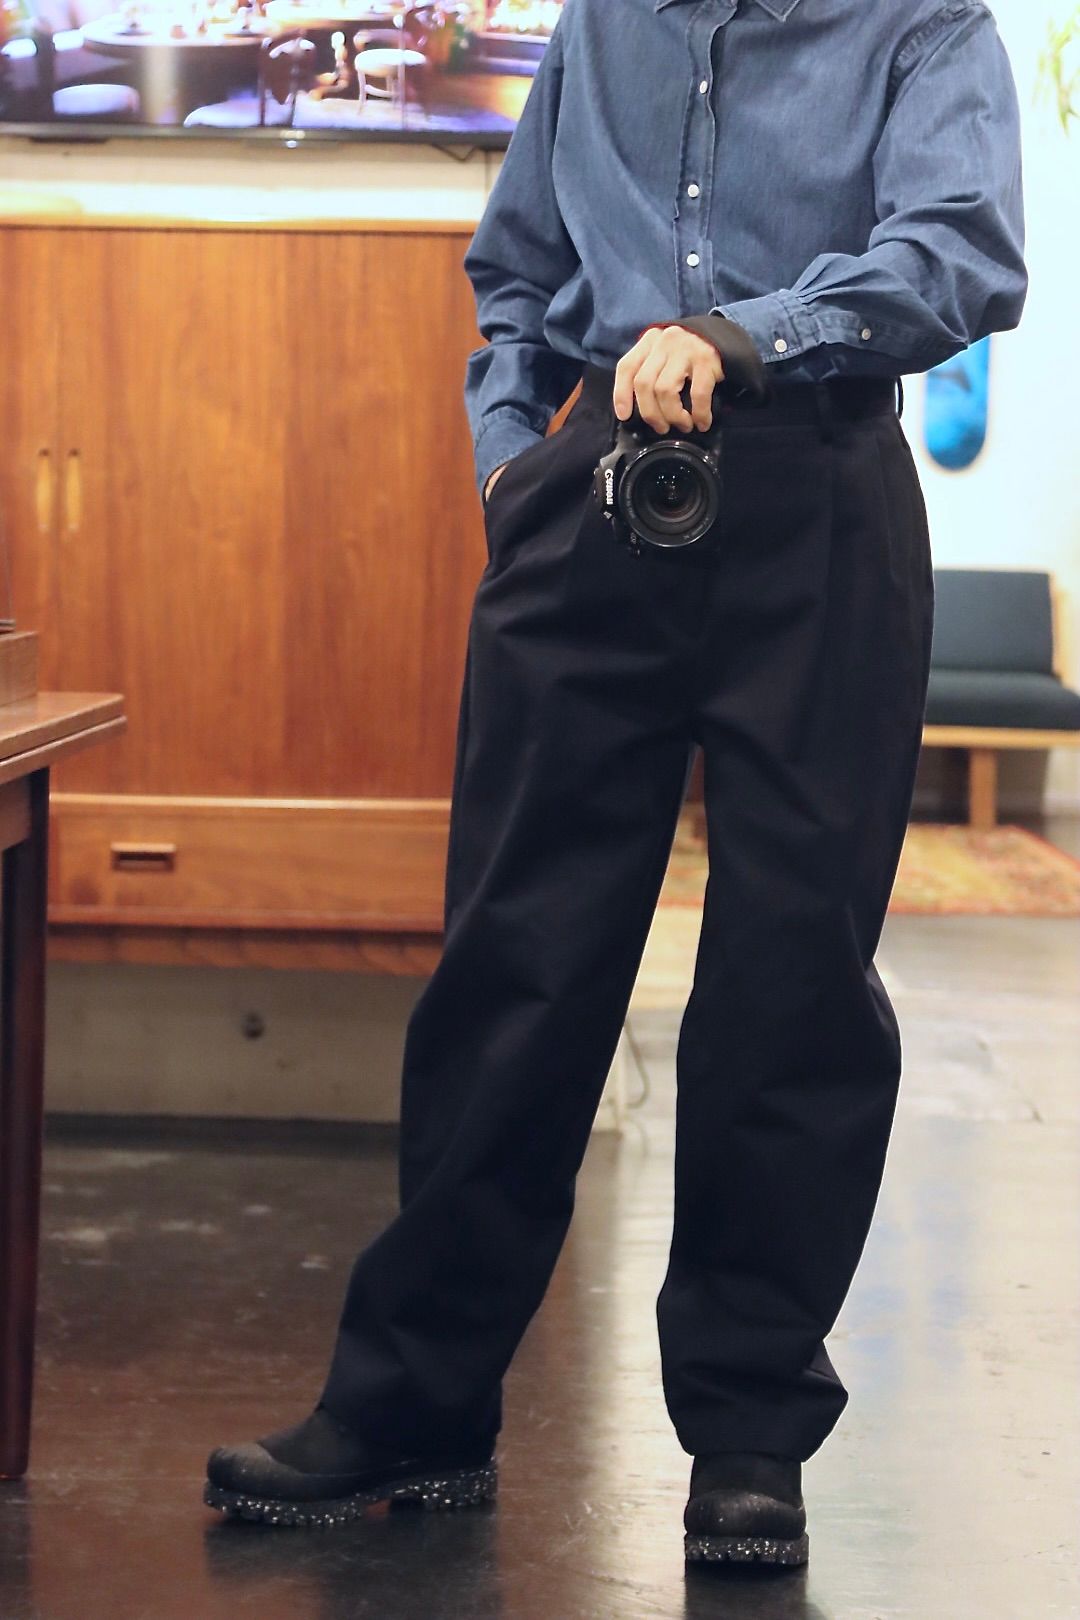 A.PRESSEType.1 Silk Blend Chino Trousers - スラックス